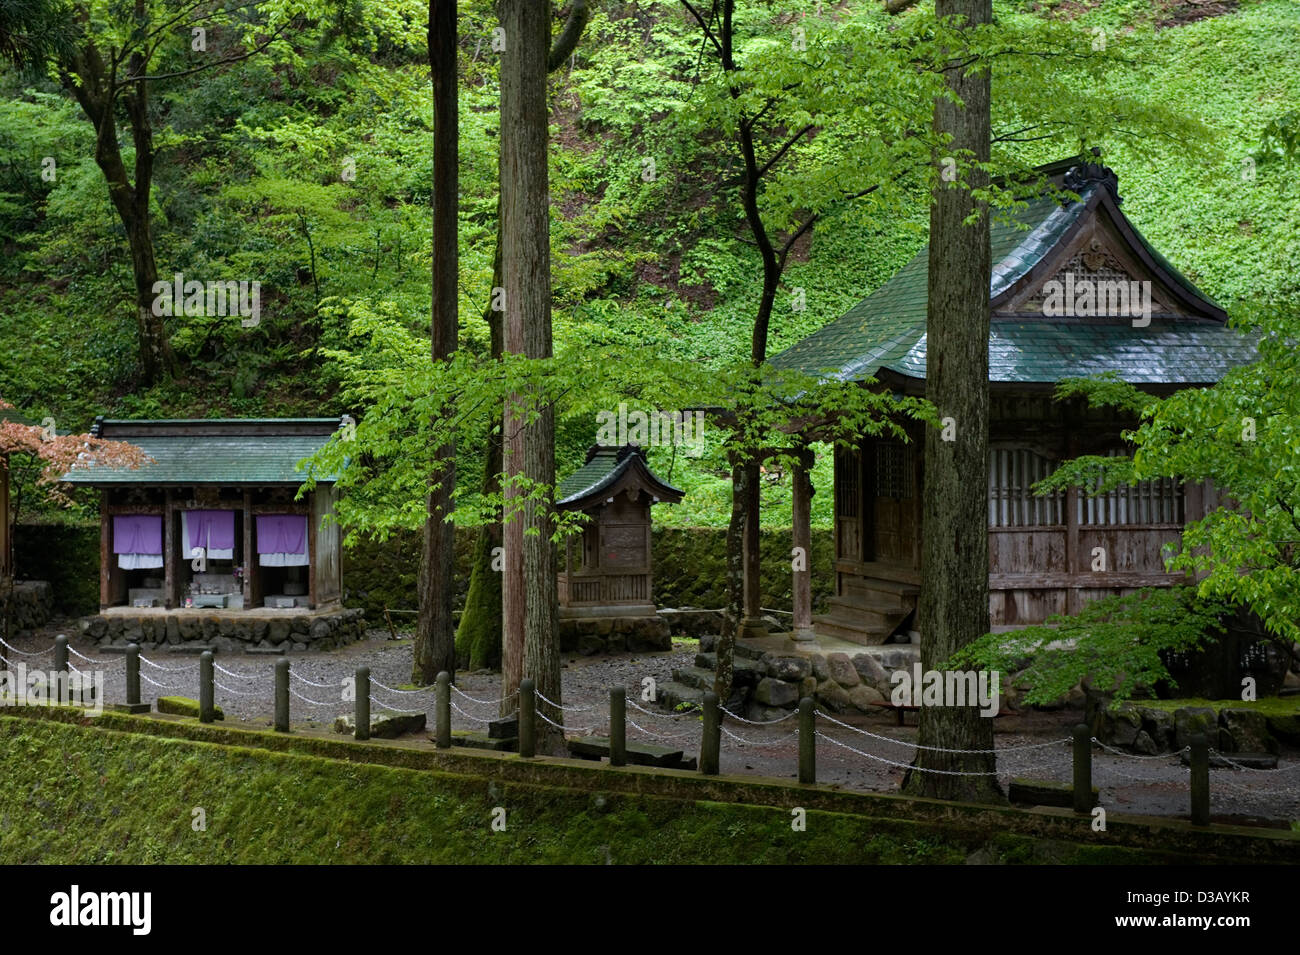 Lush green forest surrounds Buddhist buildings of Eiheiji Zen Buddhist Temple nestled deep in the mountains of Fukui Prefecture. Stock Photo